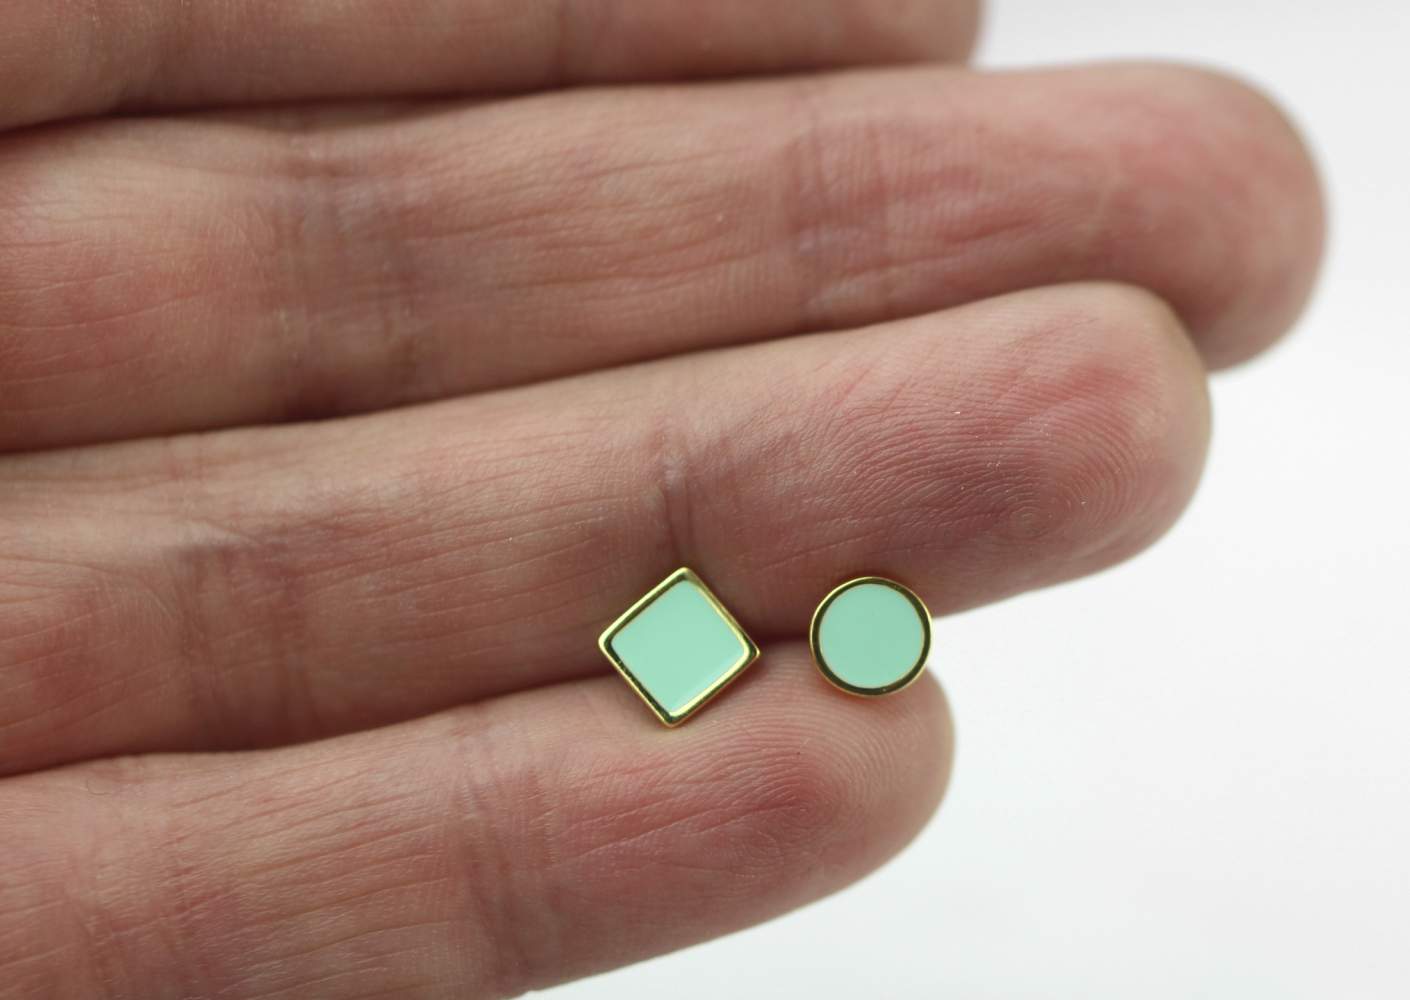 Mismatched stud earrings. 18k gold over sterling and enamel.